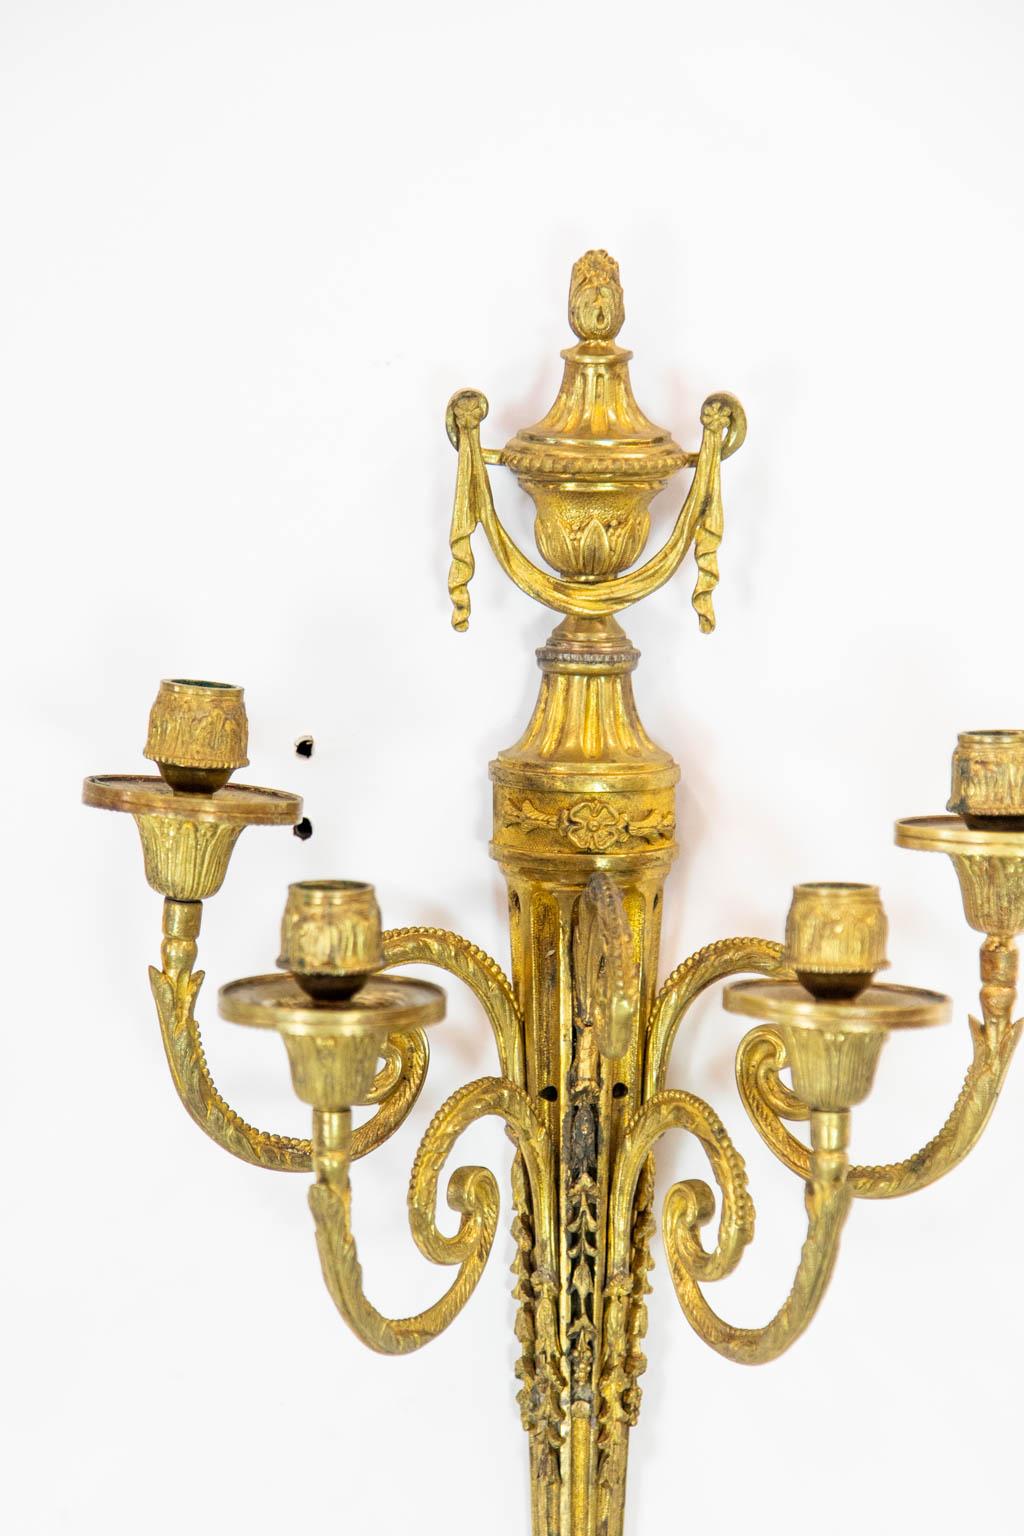 Each of these wall sconces has four candle sockets and a fluted central section with carved grapevines and leaves. The top has a classical with drapery swags.